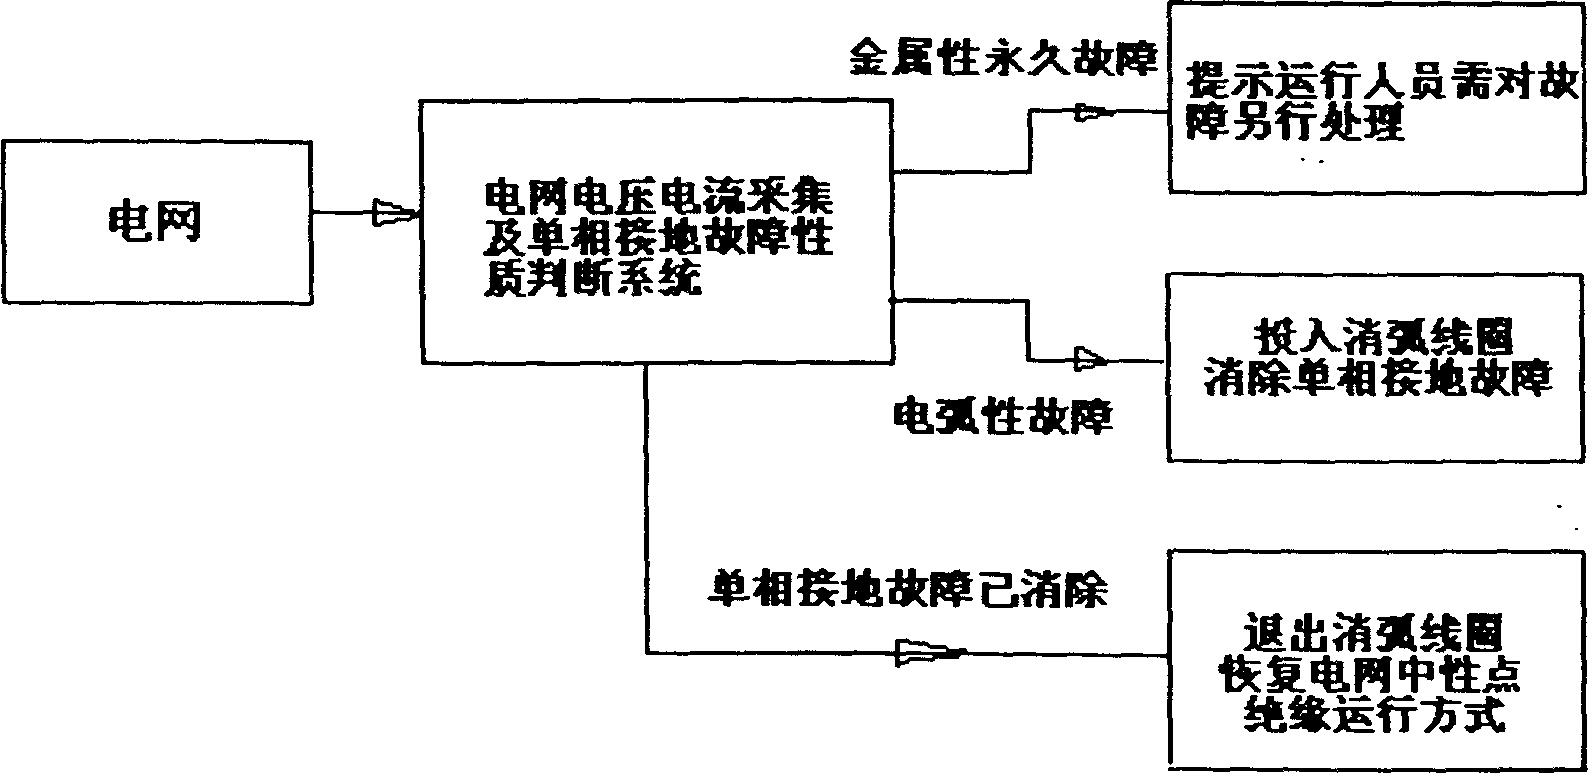 Power system neutral point compound operation method